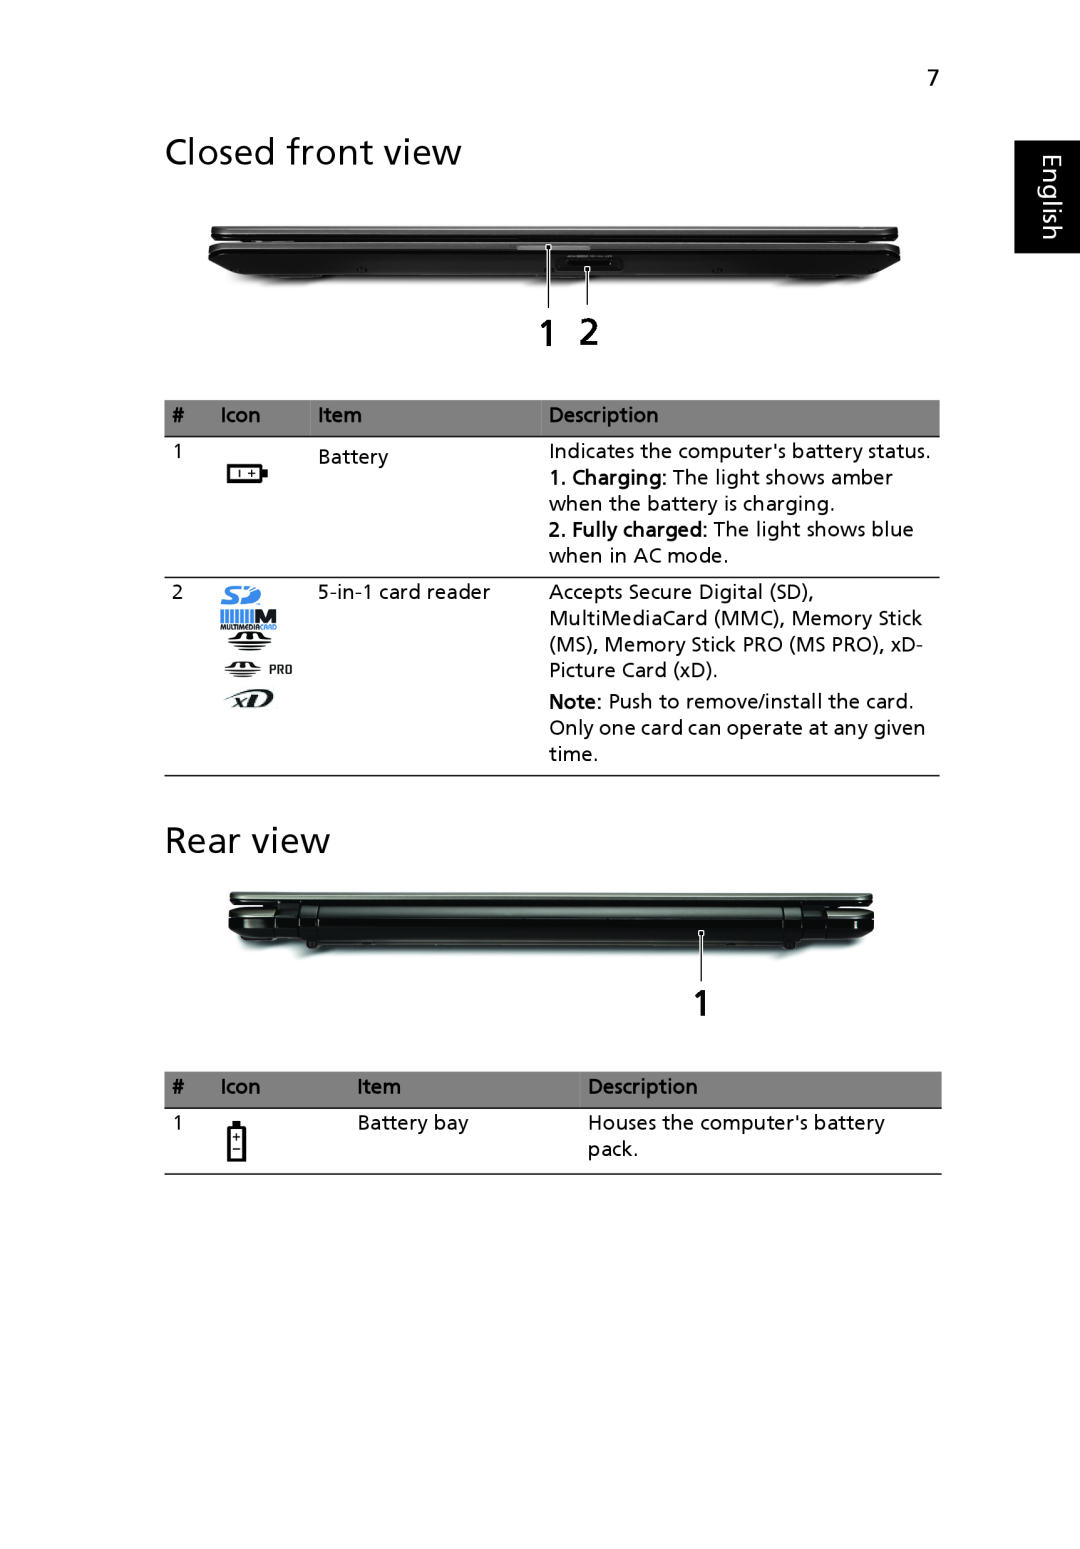 Acer 5538 Series manual Closed front view, Rear view, # Icon, English, Description 